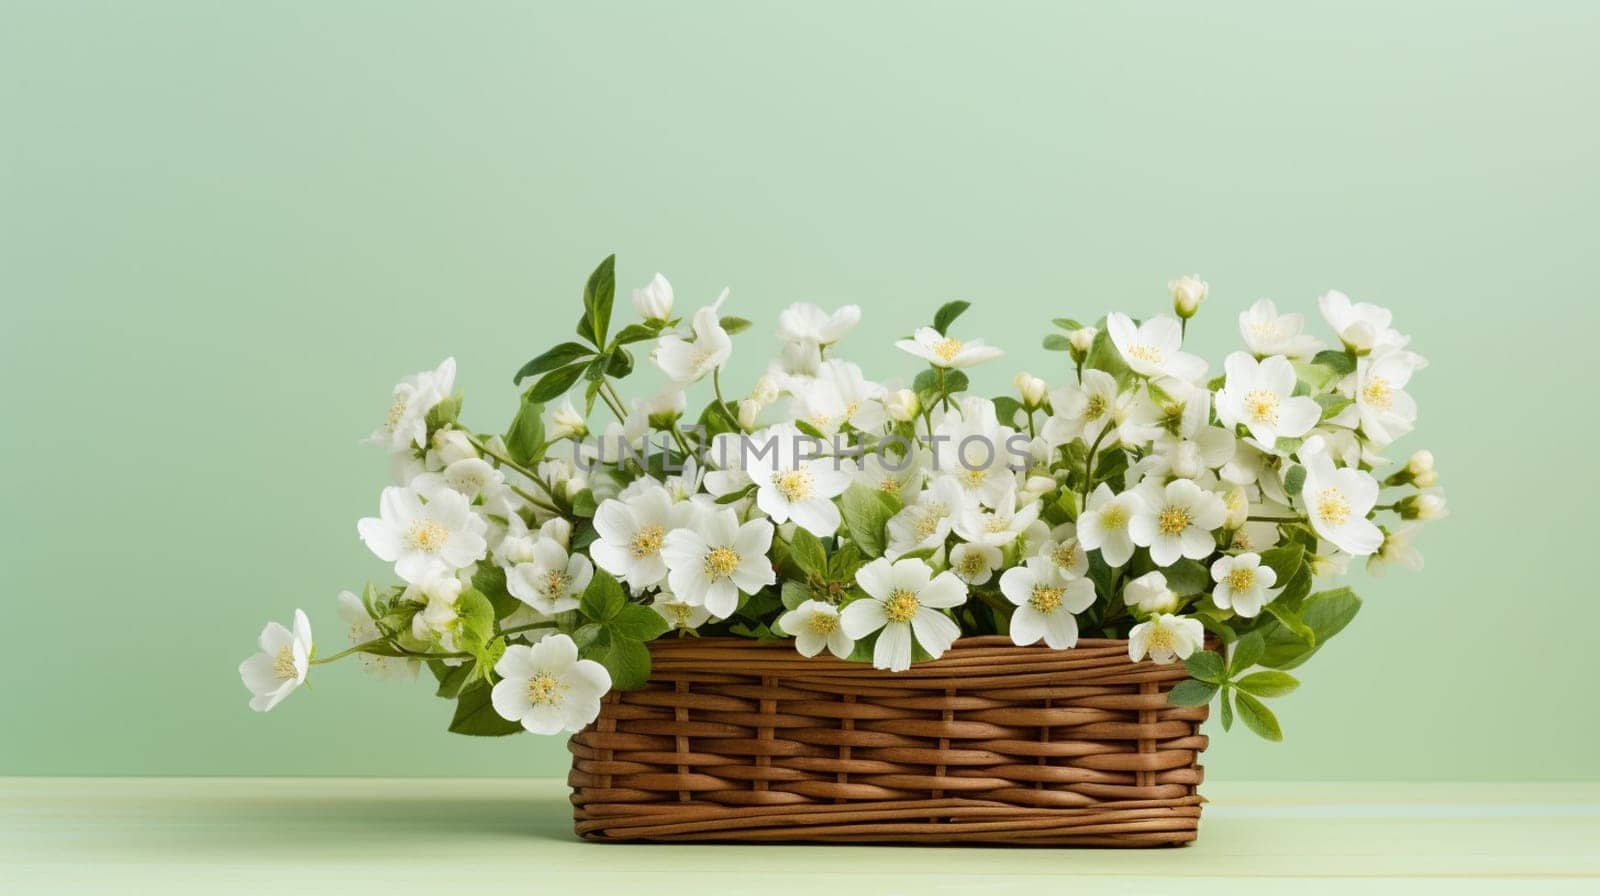 Basket of white flowers on wooden surface against green background. High quality photo